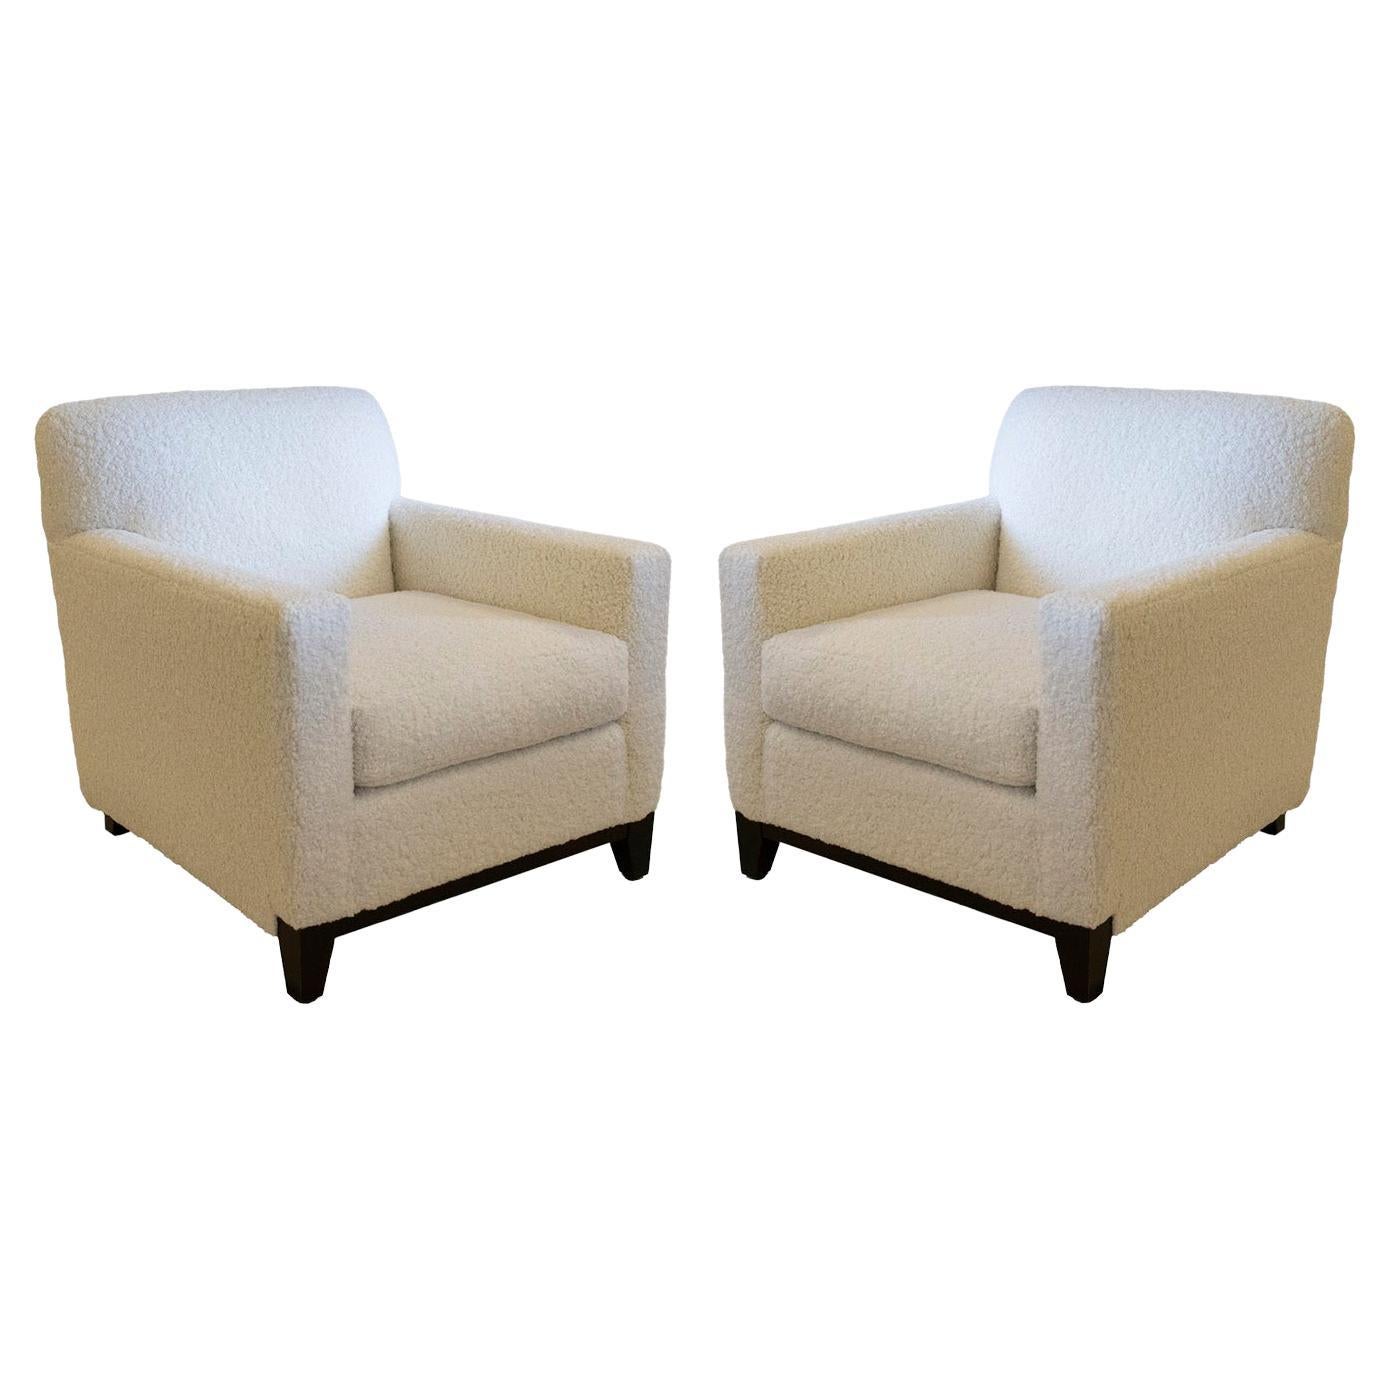 Art Deco Inspired Club Chairs in Faux Shearling Boucle by Rowe